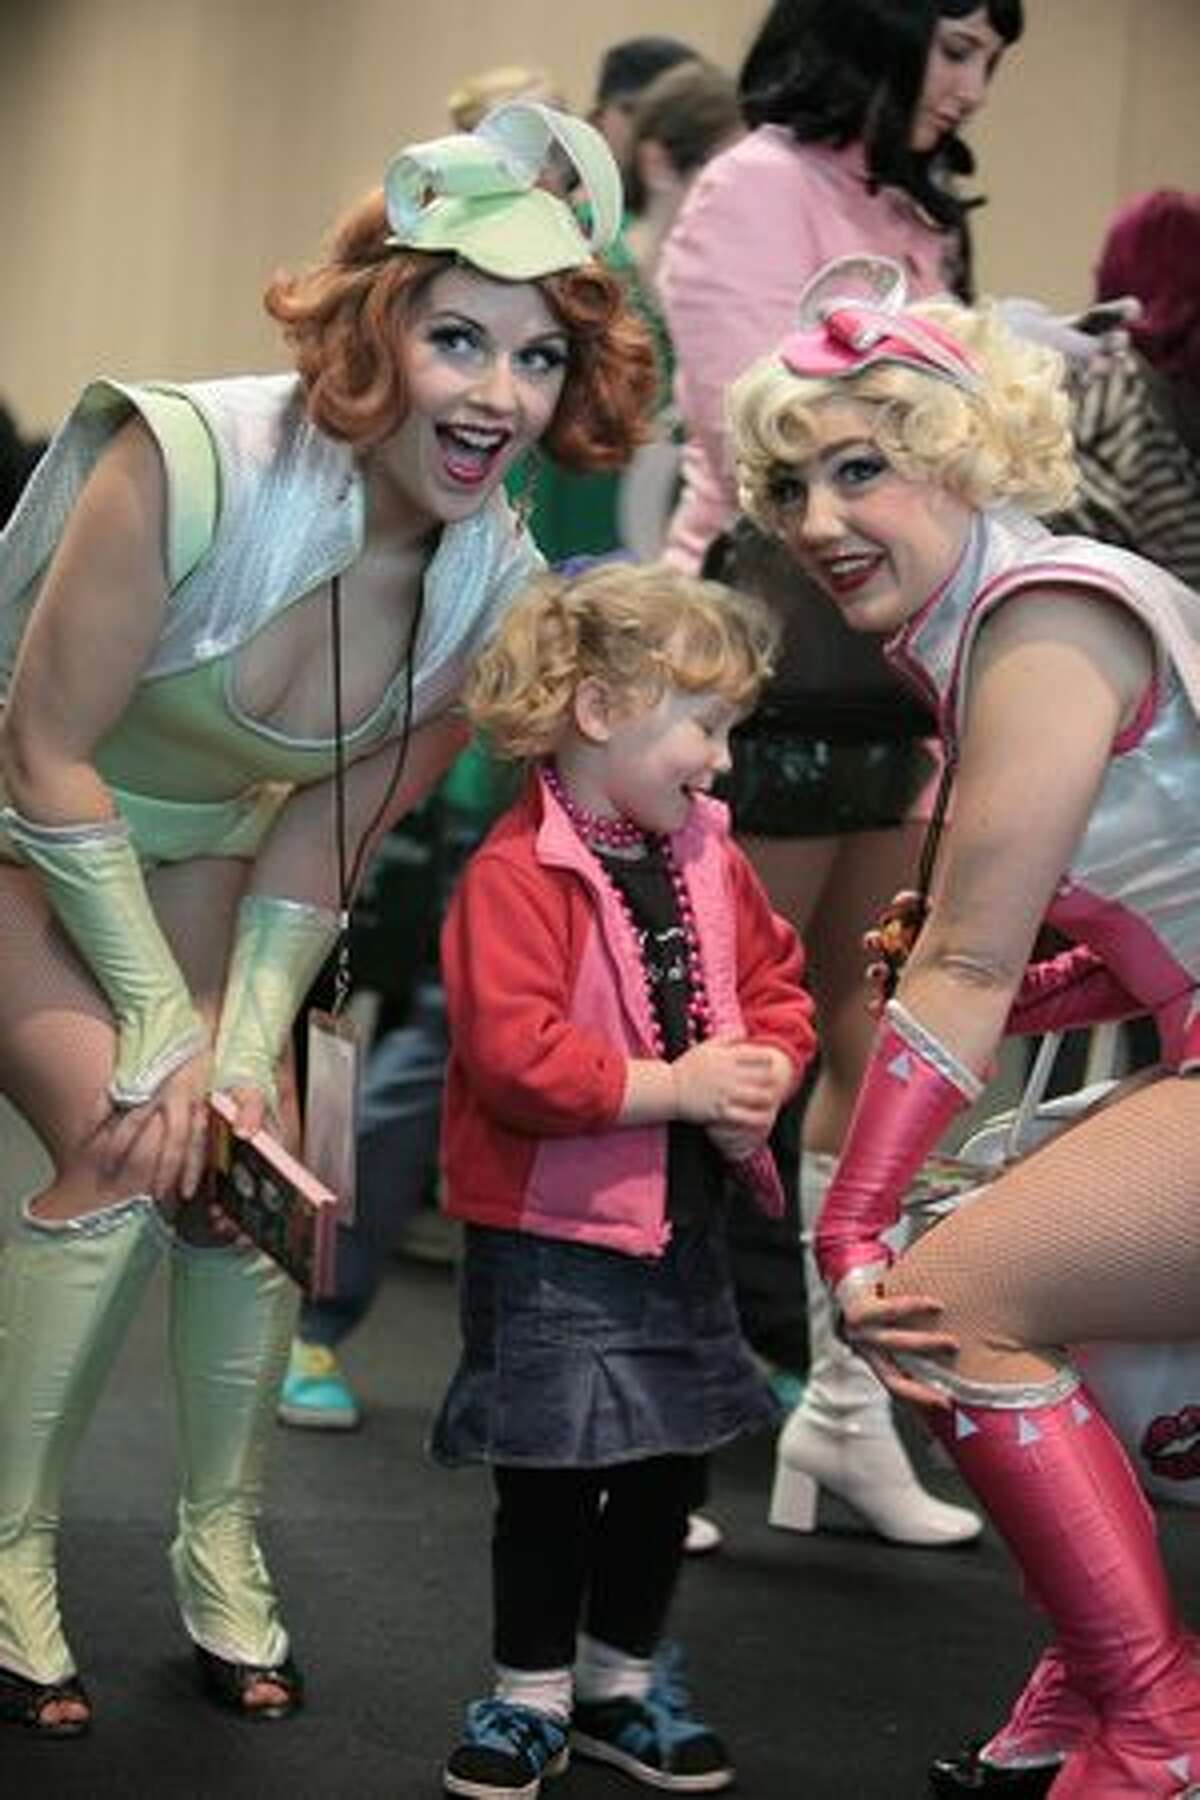 Baylyn Savage, 2, poses with members of the Atomic Bombshells during Emerald City ComiCon.